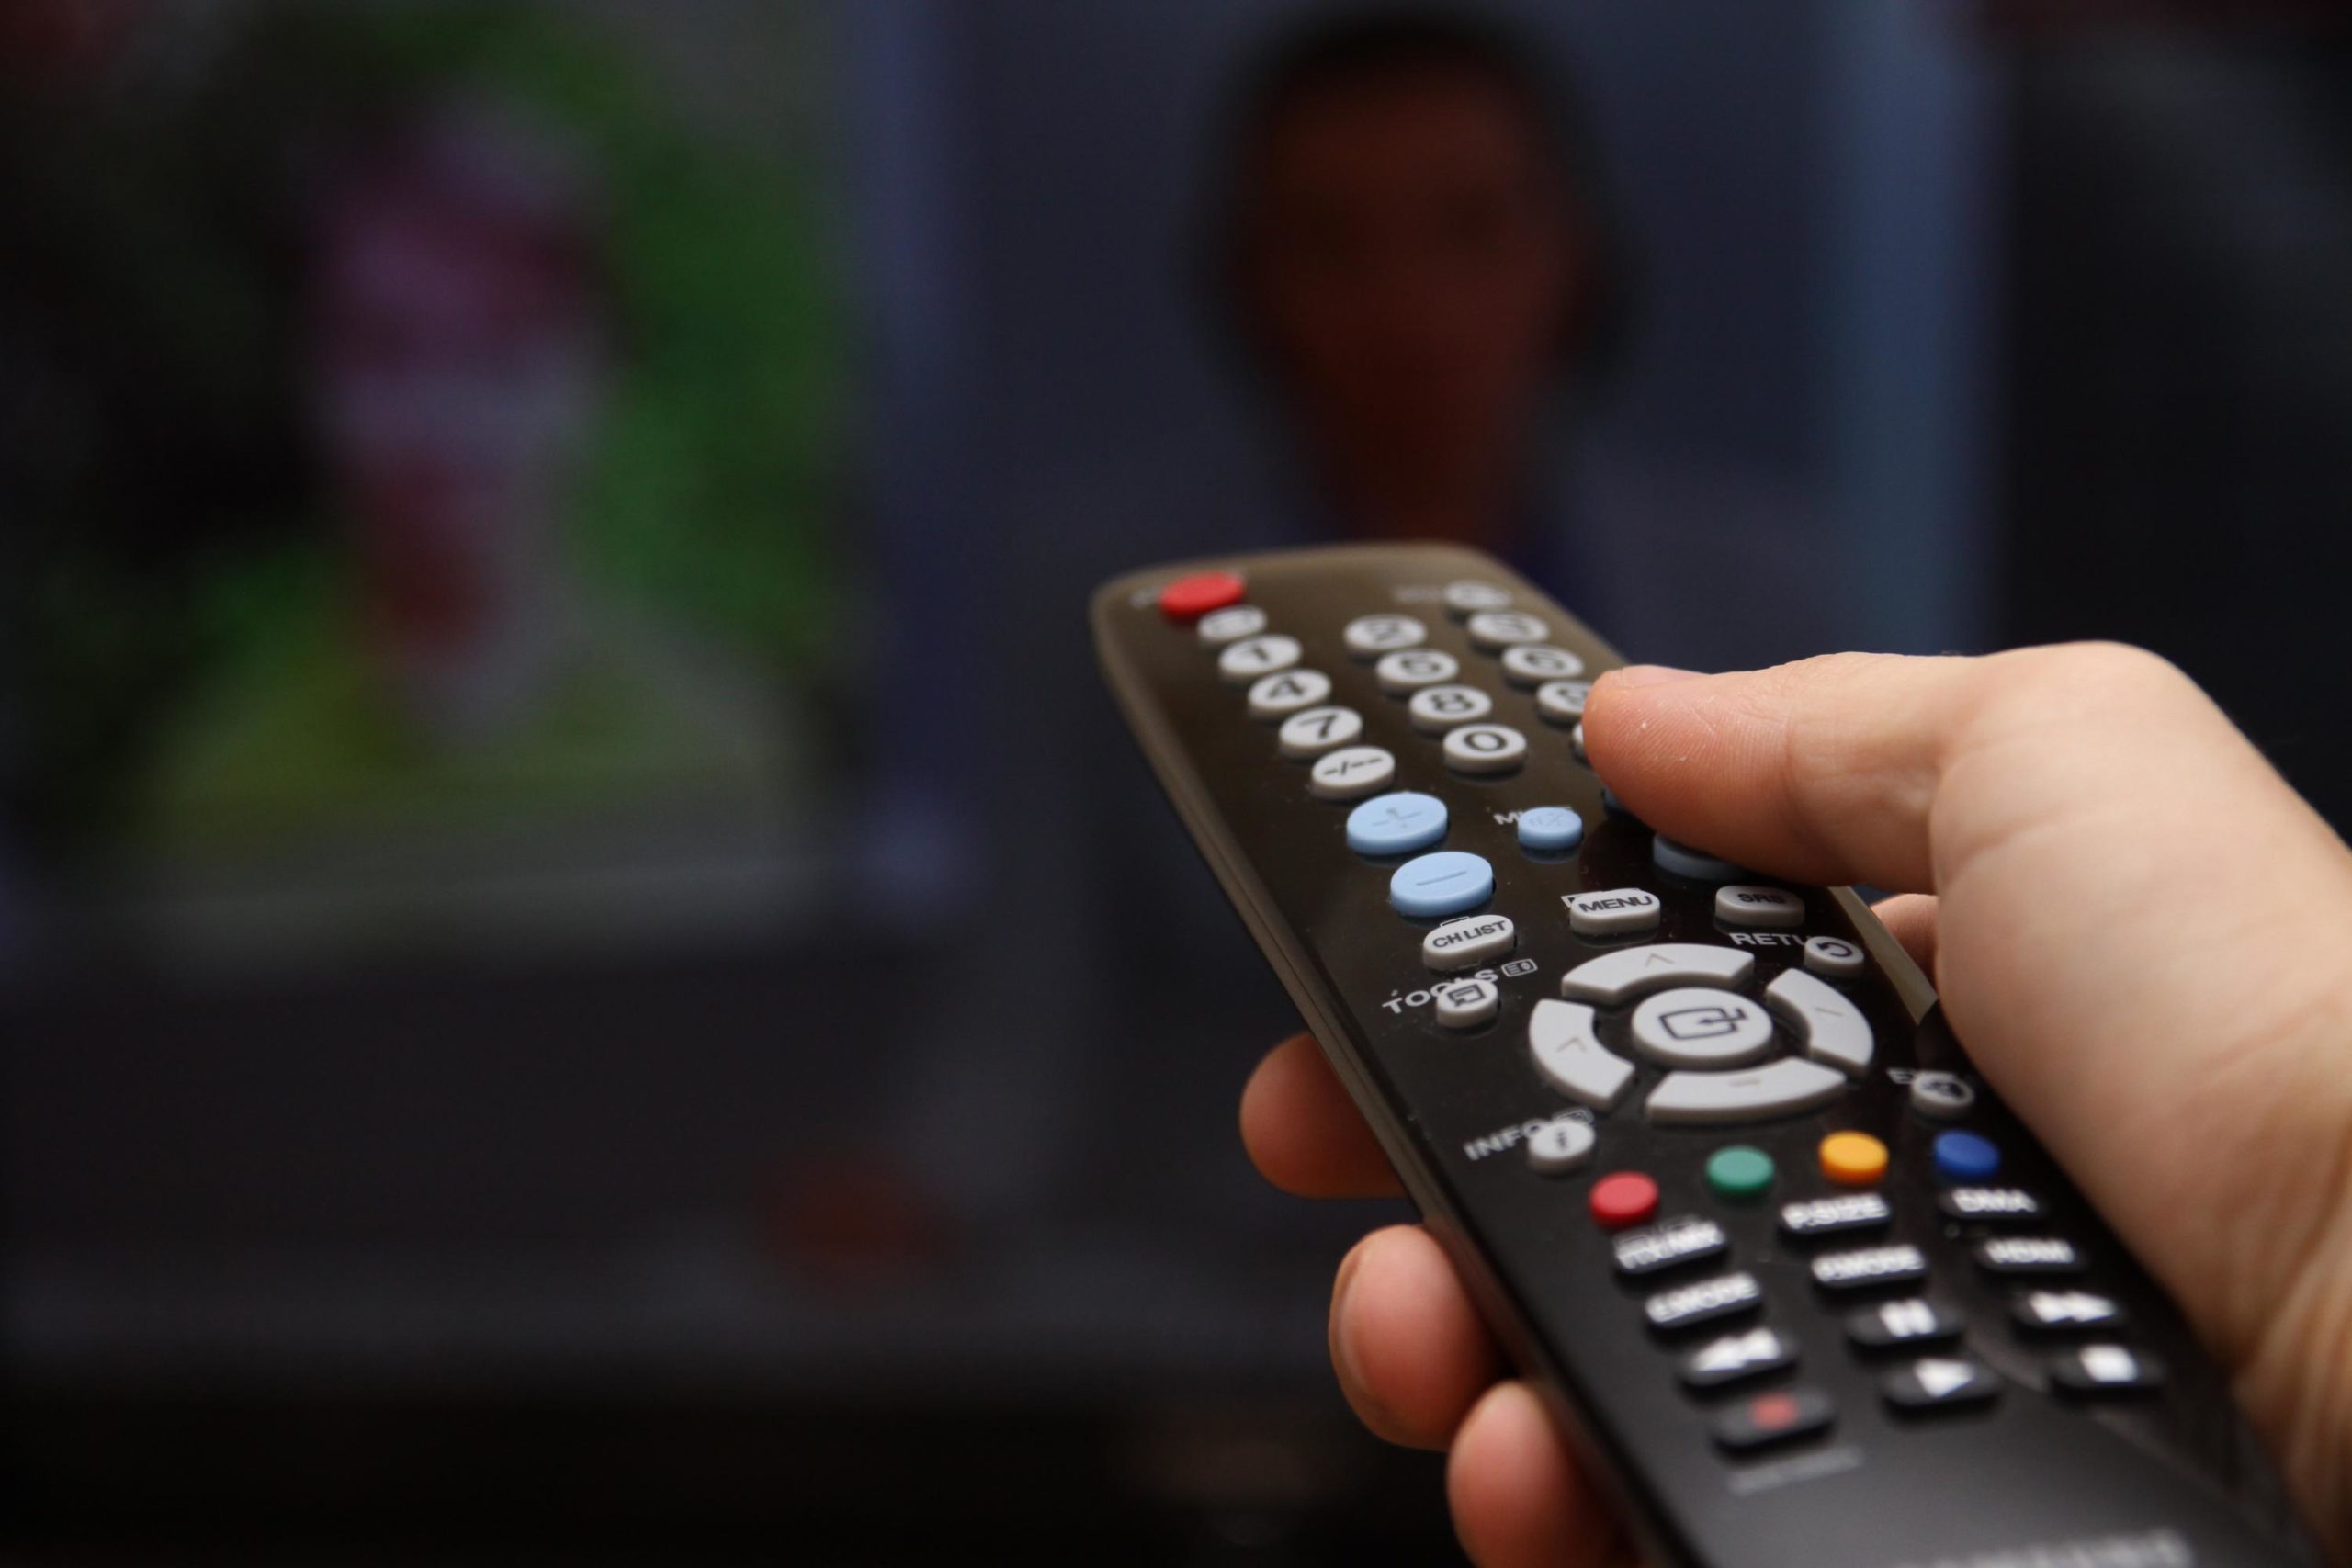 Ranking of the best universal TV remote controls in 2022